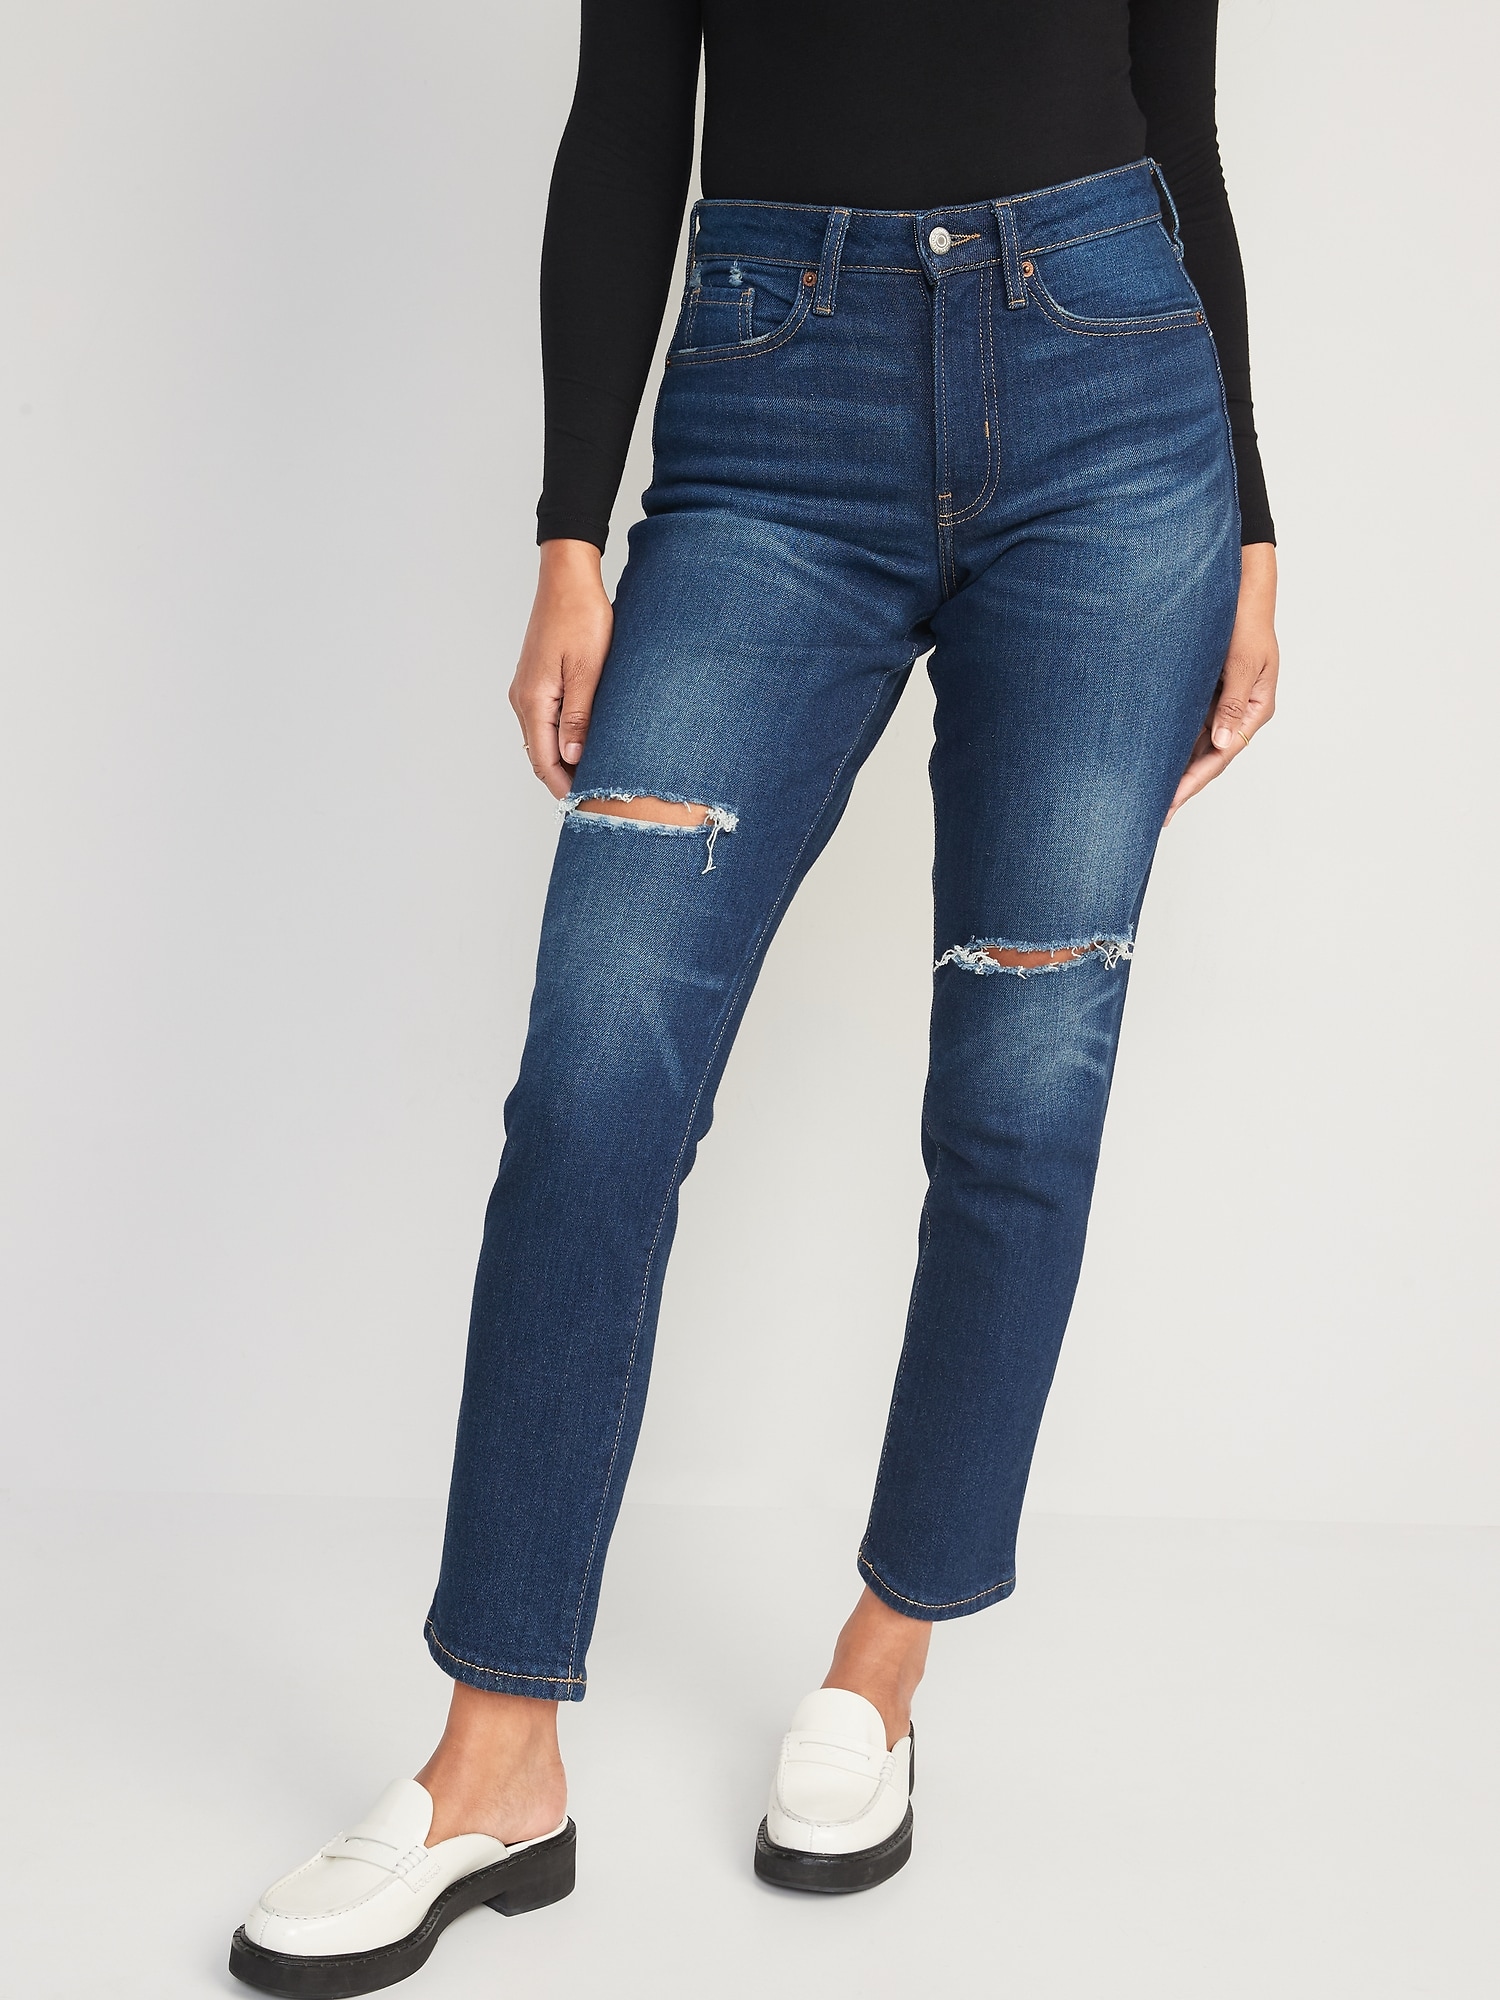 Old Navy Curvy High-Waisted OG Straight Ripped Ankle Jeans for Women blue. 1